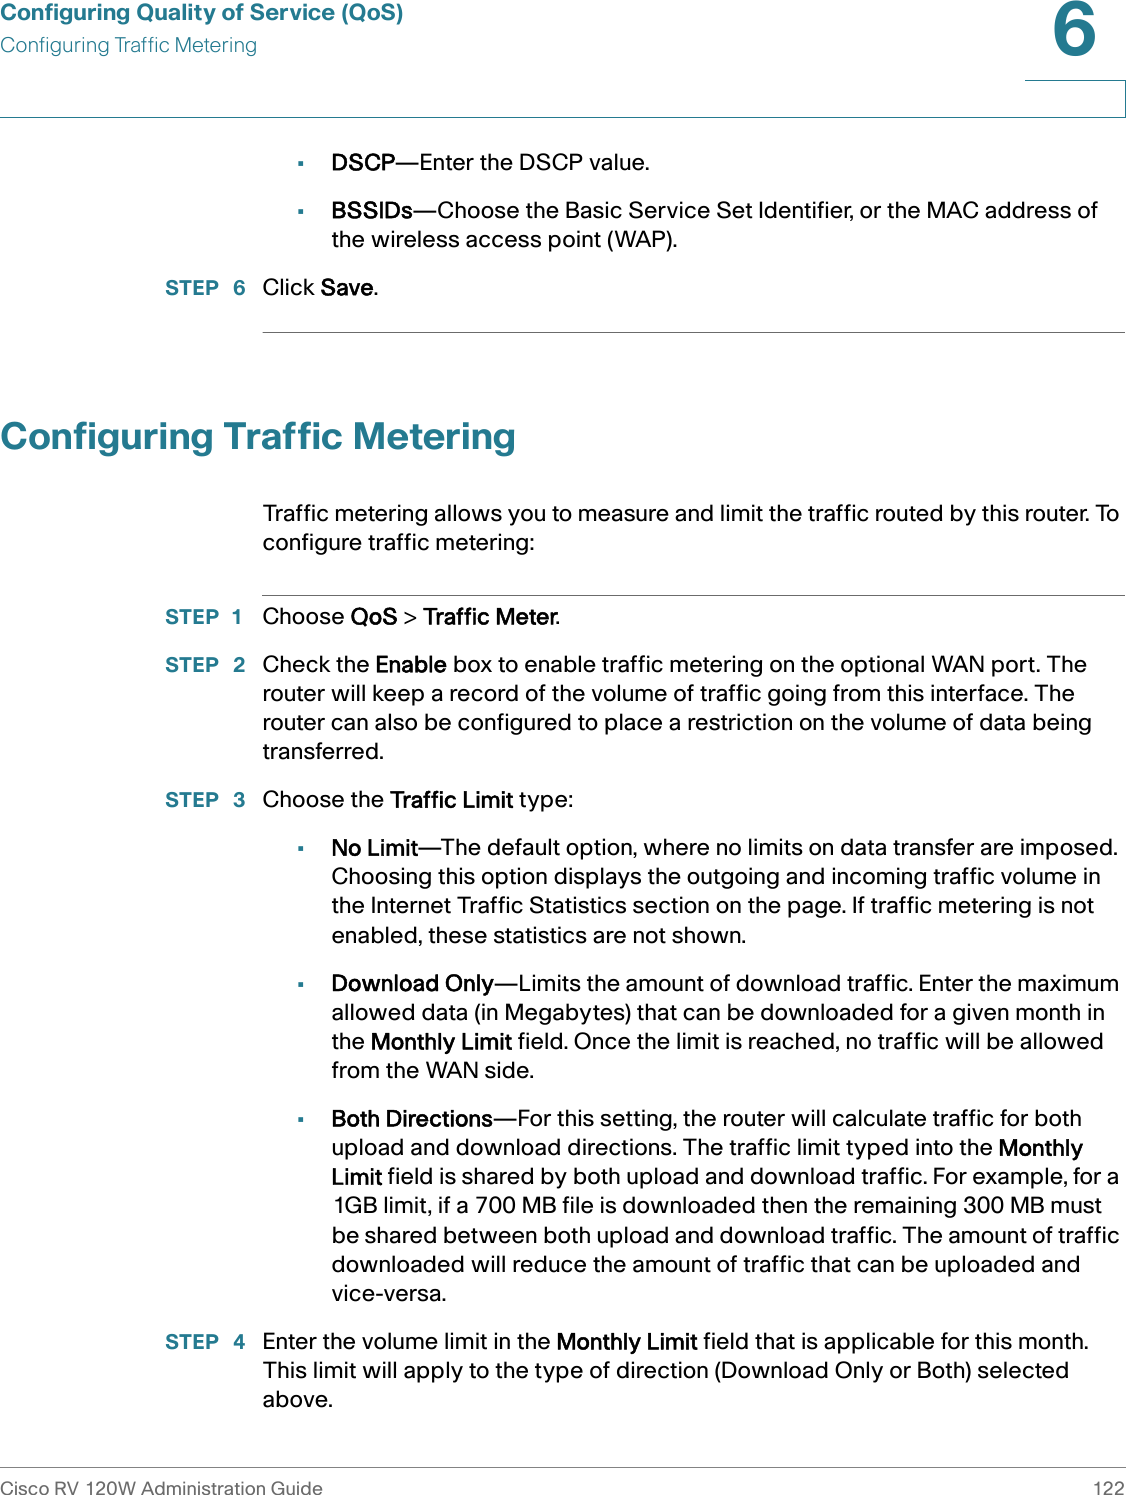 Configuring Quality of Service (QoS)Configuring Traffic MeteringCisco RV 120W Administration Guide 1226 •DSCP—Enter the DSCP value.•BSSIDs—Choose the Basic Service Set Identifier, or the MAC address of the wireless access point (WAP).STEP  6 Click Save.Configuring Traffic MeteringTraffic metering allows you to measure and limit the traffic routed by this router. To configure traffic metering:STEP 1 Choose QoS &gt; Traffic Meter.STEP  2 Check the Enable box to enable traffic metering on the optional WAN port. The router will keep a record of the volume of traffic going from this interface. The router can also be configured to place a restriction on the volume of data being transferred. STEP  3 Choose the Traffic Limit type:•No Limit—The default option, where no limits on data transfer are imposed. Choosing this option displays the outgoing and incoming traffic volume in the Internet Traffic Statistics section on the page. If traffic metering is not enabled, these statistics are not shown. •Download Only—Limits the amount of download traffic. Enter the maximum allowed data (in Megabytes) that can be downloaded for a given month in the Monthly Limit field. Once the limit is reached, no traffic will be allowed from the WAN side. •Both Directions—For this setting, the router will calculate traffic for both upload and download directions. The traffic limit typed into the Monthly Limit field is shared by both upload and download traffic. For example, for a 1GB limit, if a 700 MB file is downloaded then the remaining 300 MB must be shared between both upload and download traffic. The amount of traffic downloaded will reduce the amount of traffic that can be uploaded and vice-versa. STEP  4 Enter the volume limit in the Monthly Limit field that is applicable for this month. This limit will apply to the type of direction (Download Only or Both) selected above. 